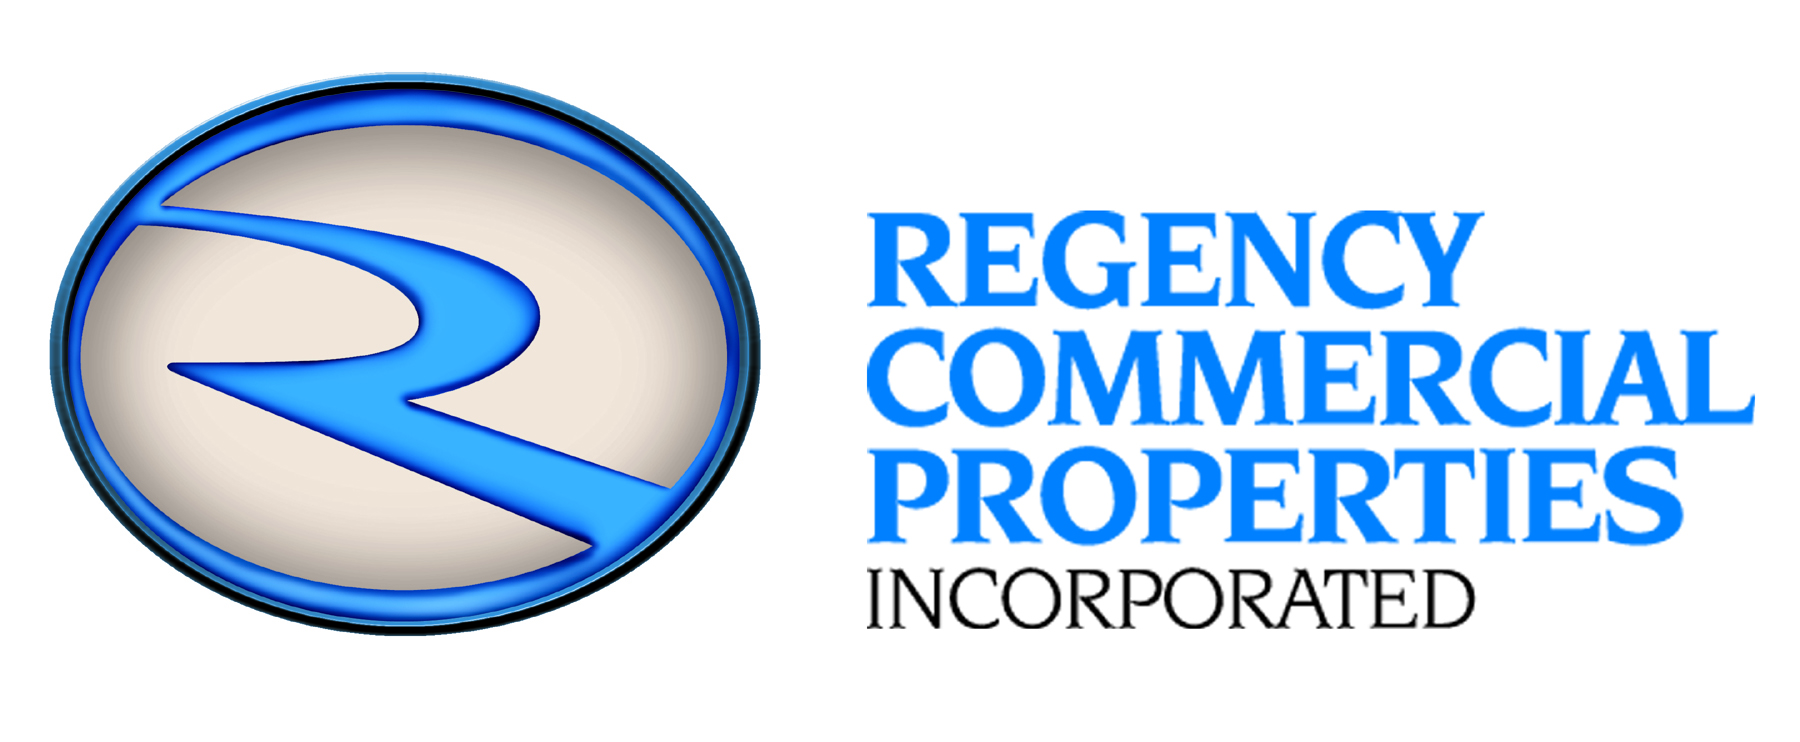 Regency Commercial Properties, Inc. closes $15.1M sale of Central Corporate Center office park and Data Center near Orlando’s Central Business District and International Airport